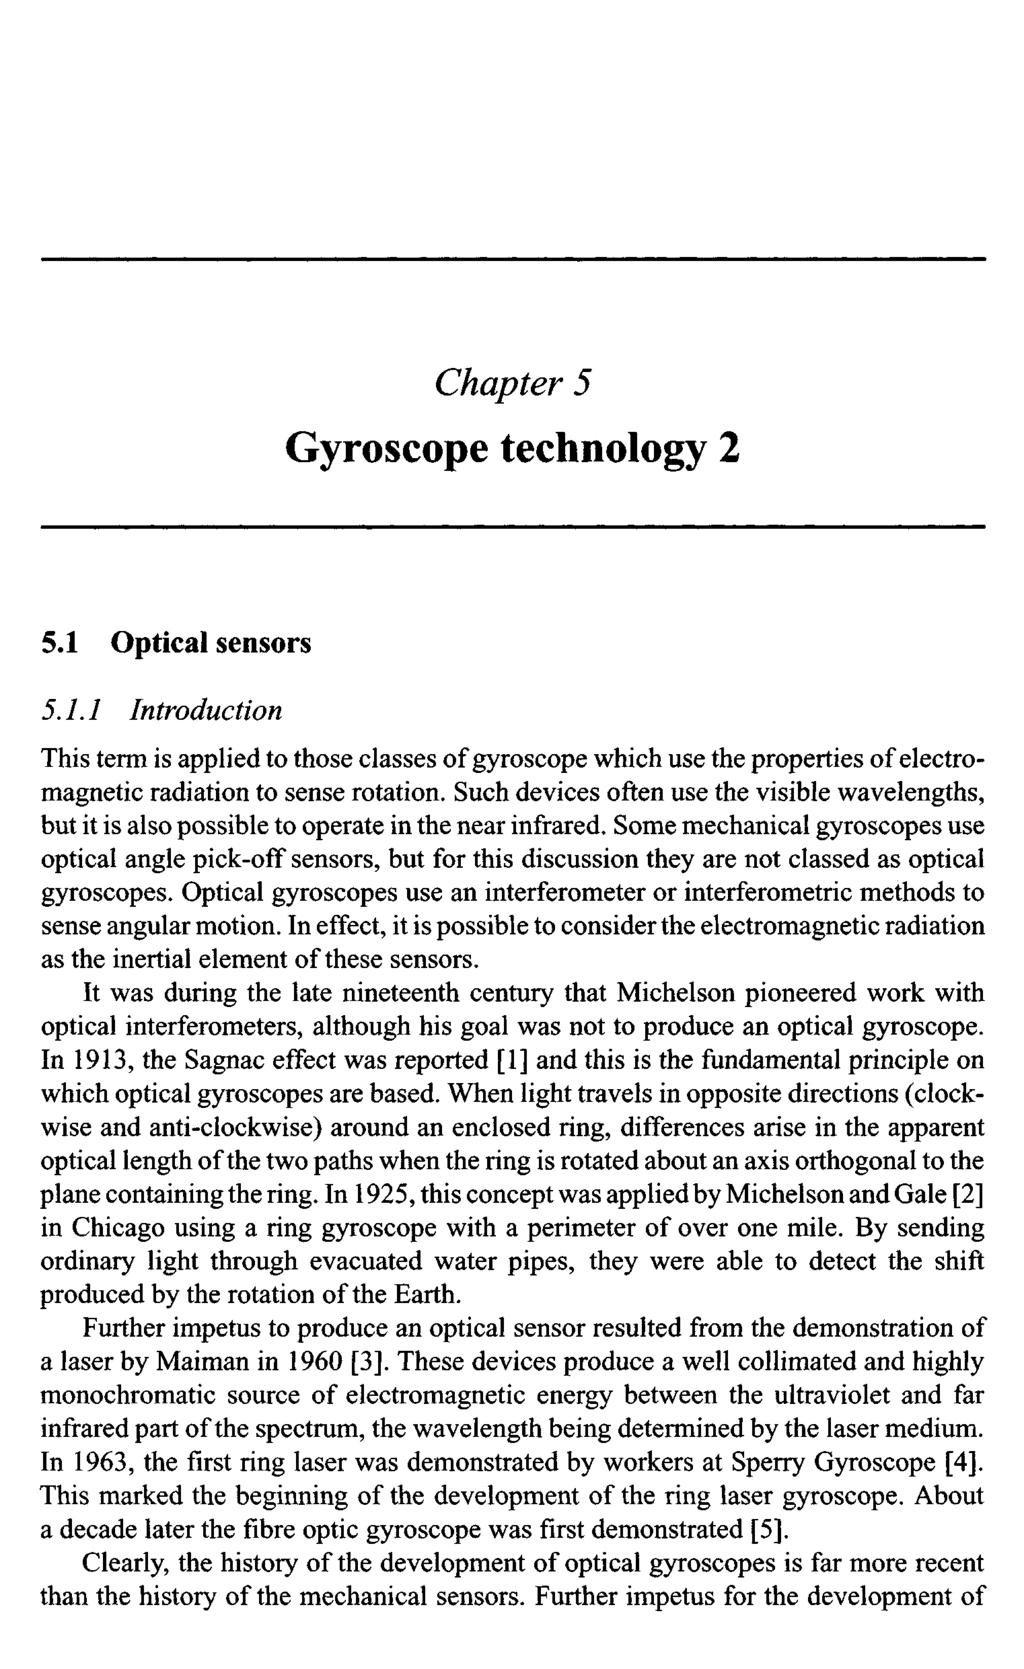 Chapter 5 Gyroscope technology 2 5.1 Optical sensors 5.1.1 Introduction This term is applied to those classes of gyroscope which use the properties of electromagnetic radiation to sense rotation.